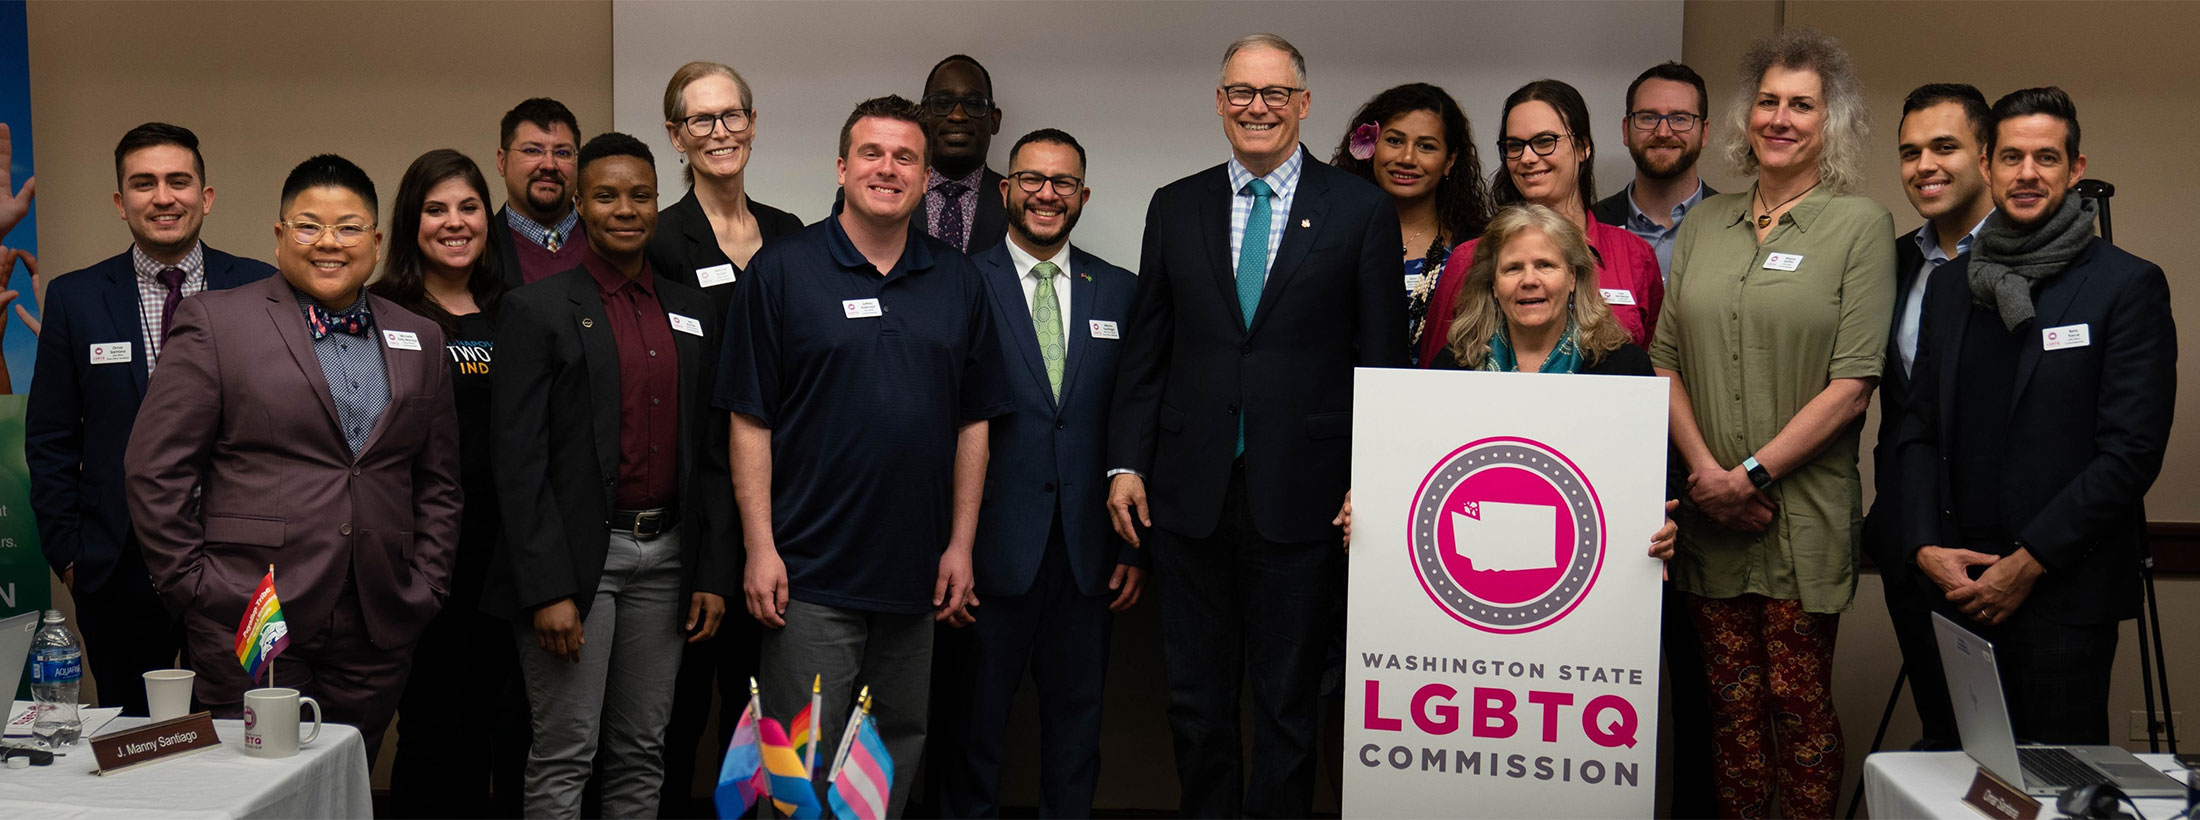 LGBTQ Commissioners with Governor Inslee